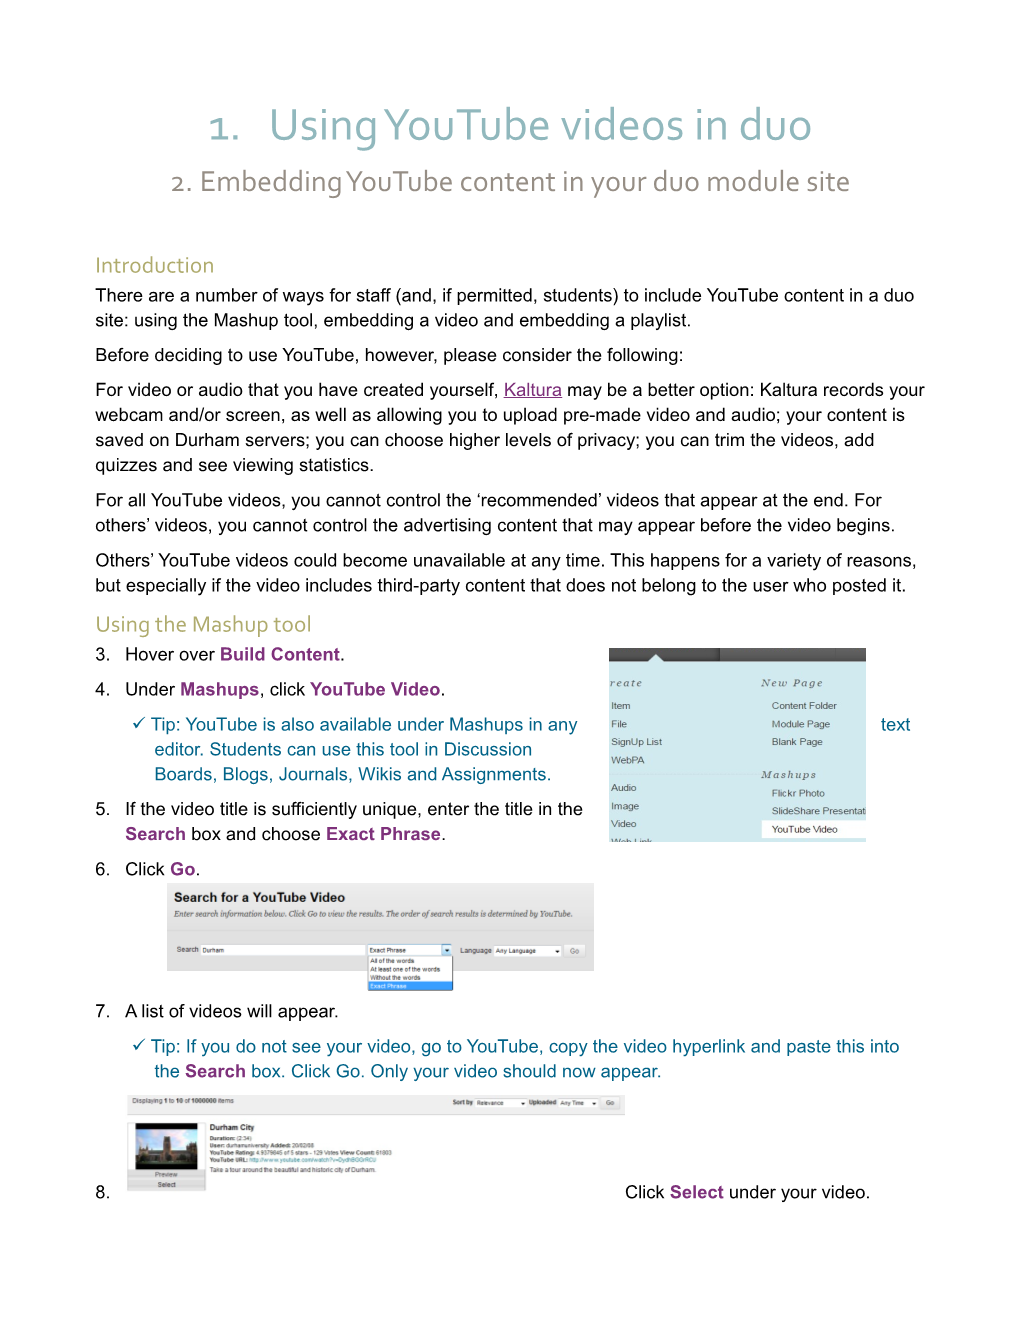 Embedding Youtube Content in Your Duo Module Site